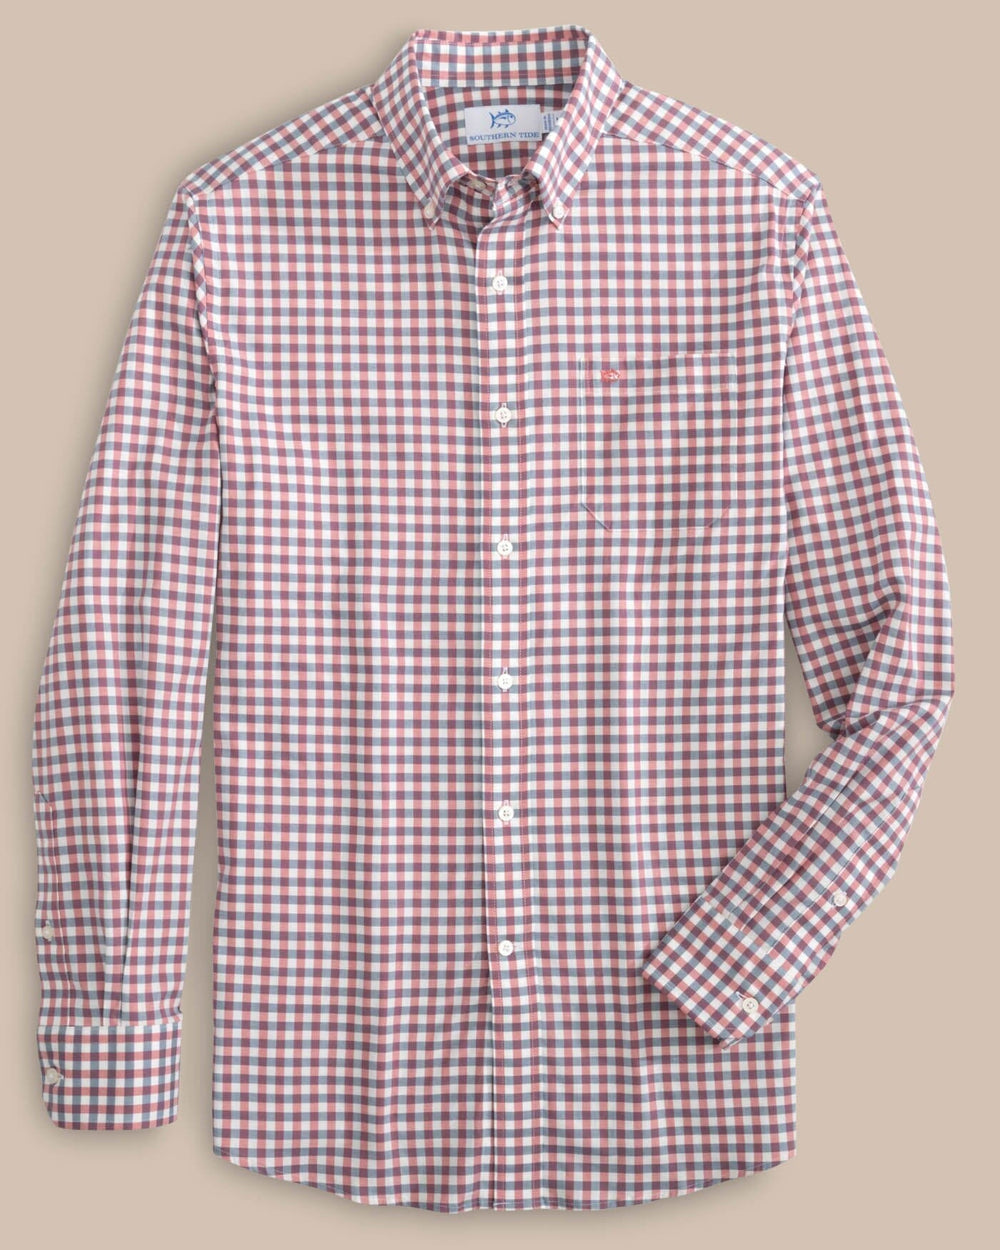 The front view of the Southern Tide Skipack Hammond Gingham Sport Shirts by Southern Tide - Dusty Coral